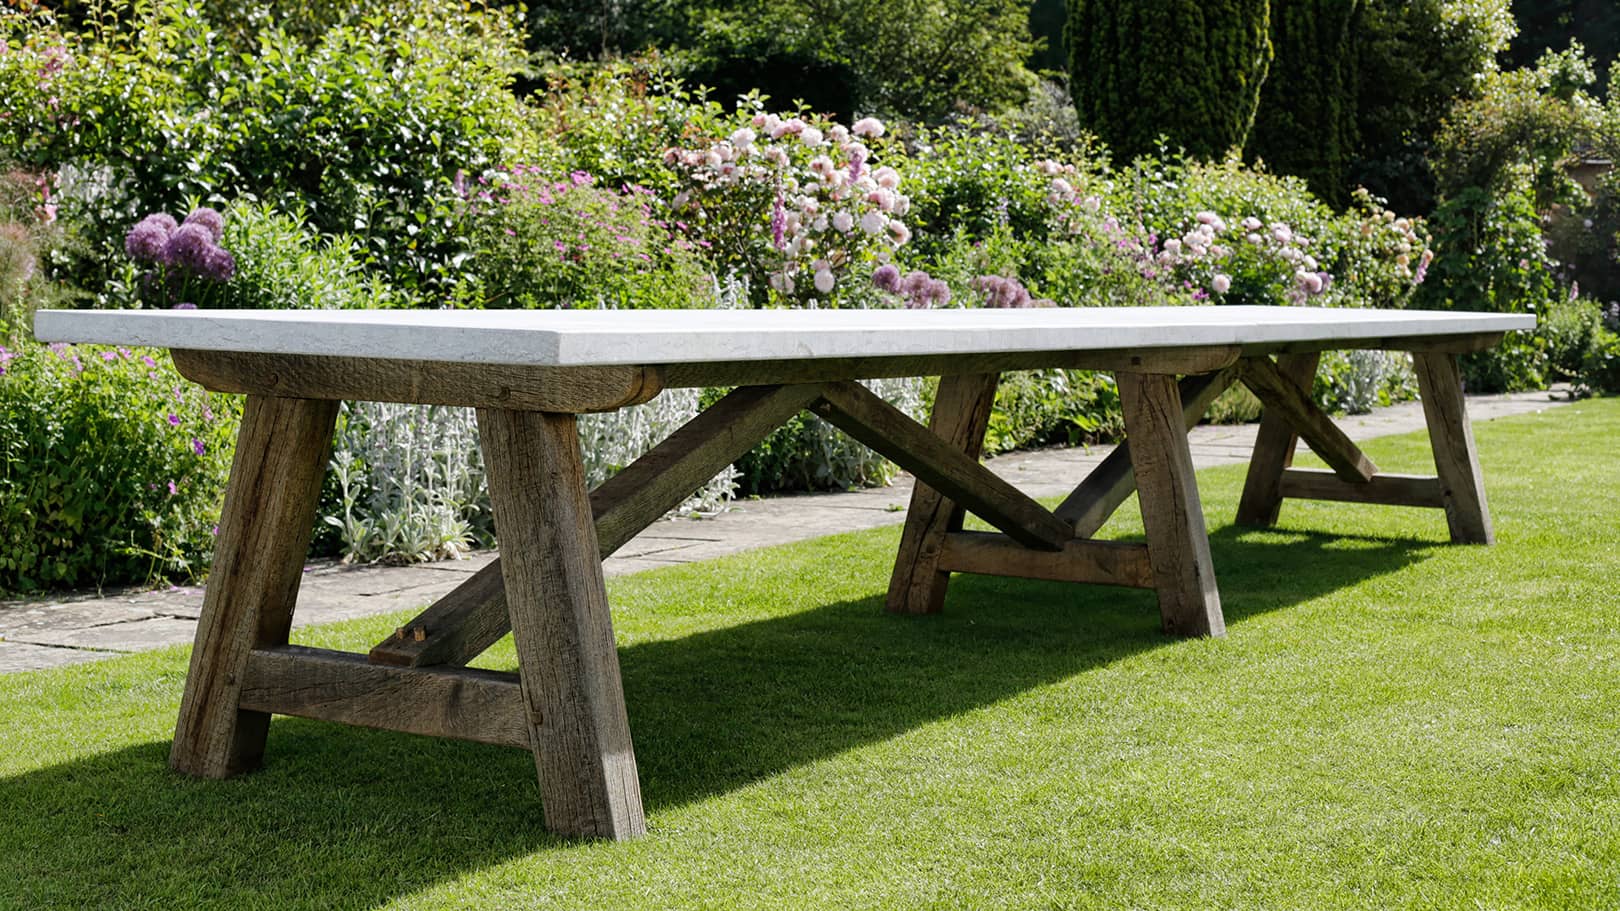 Oxenwood   Ready To Buy Furniture   Garden & Landscape Designers ...